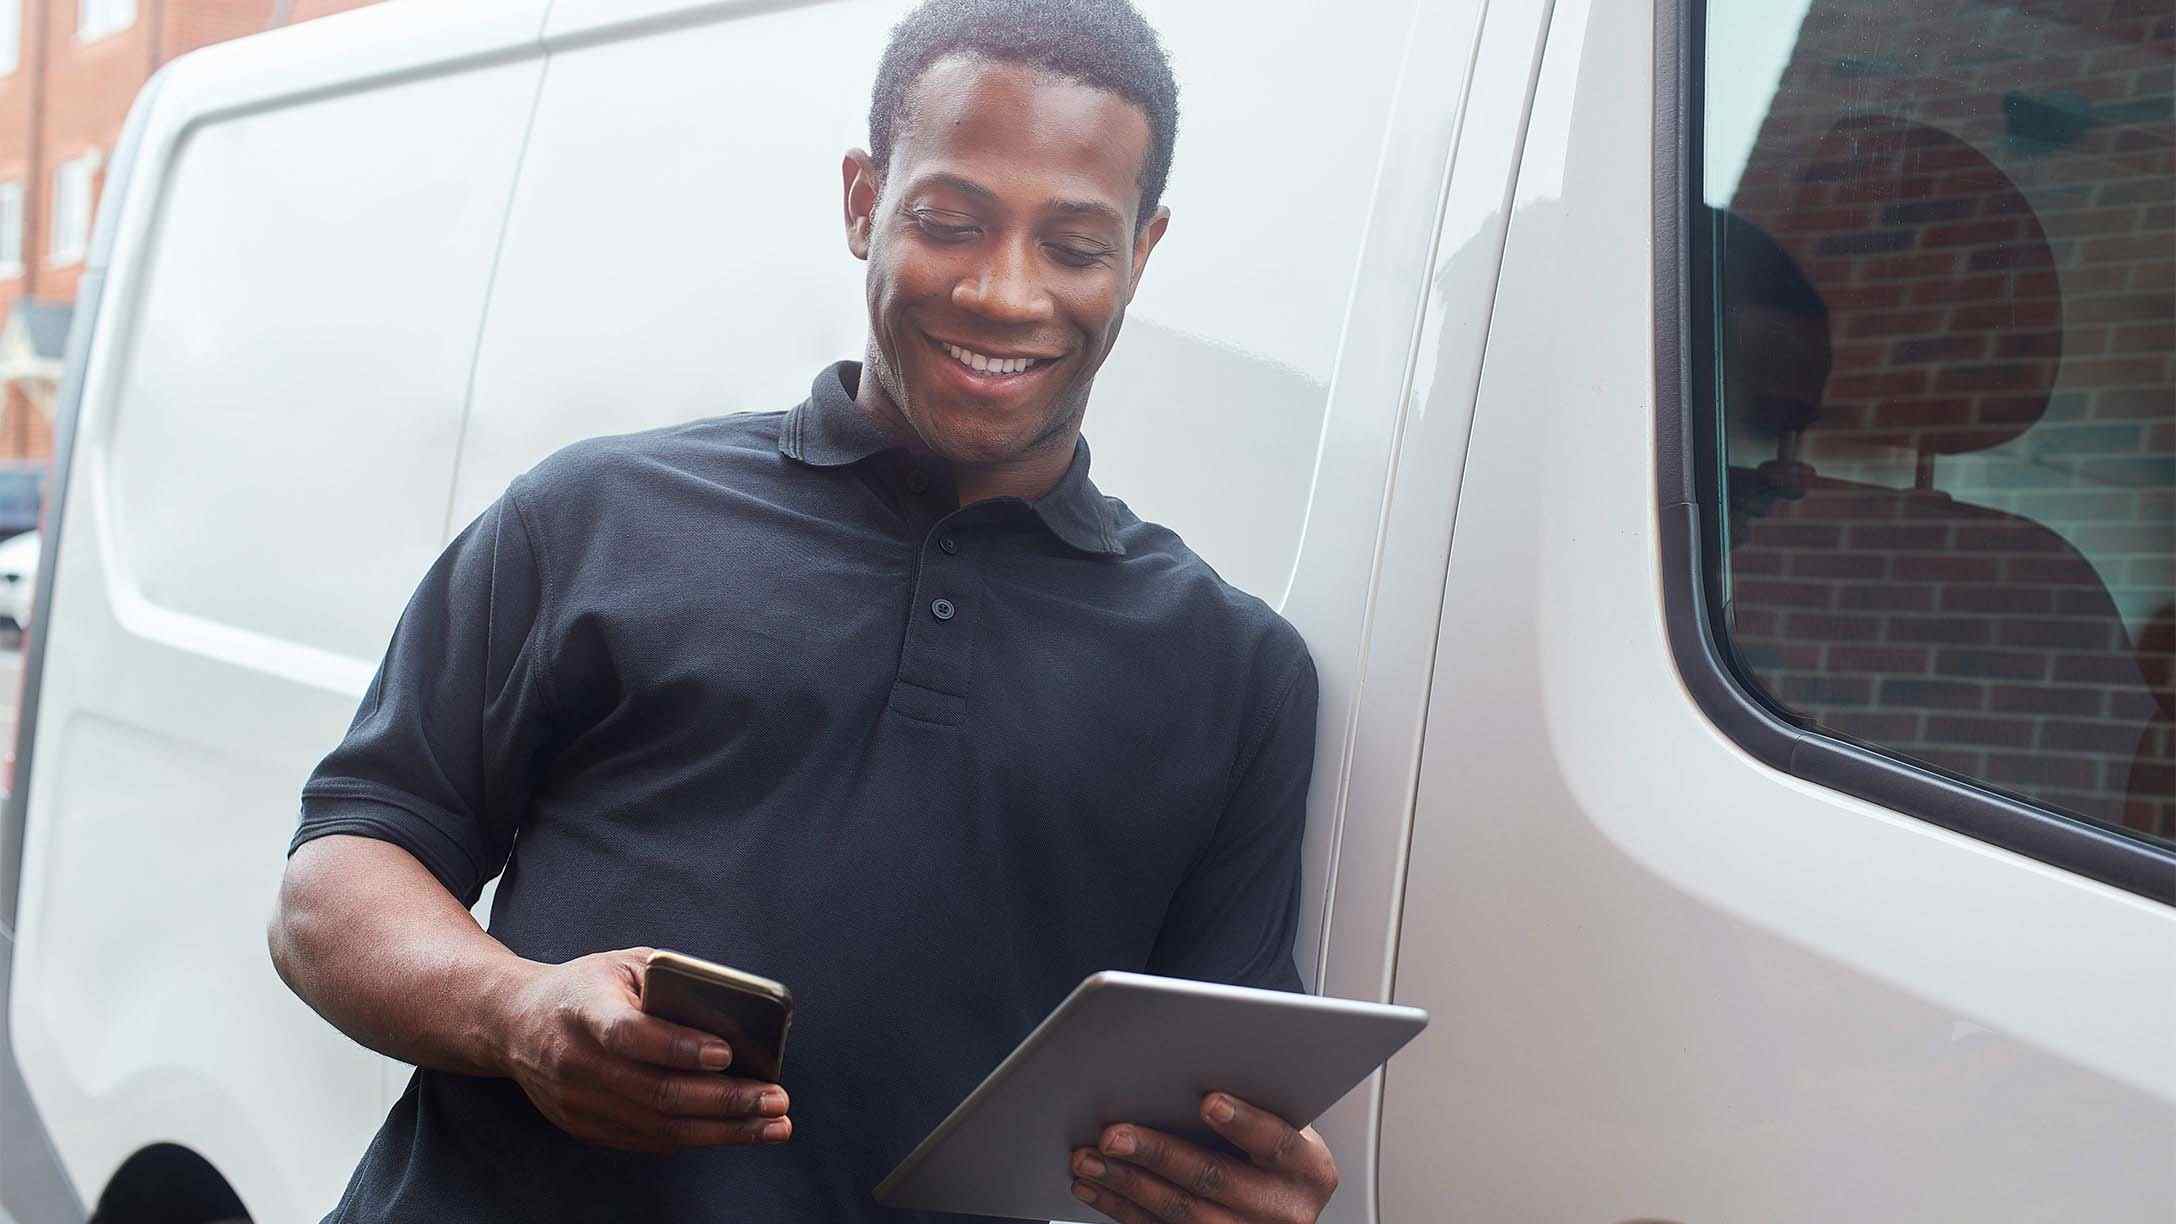 Person leaning against a vehicle looking at a tablet and phone